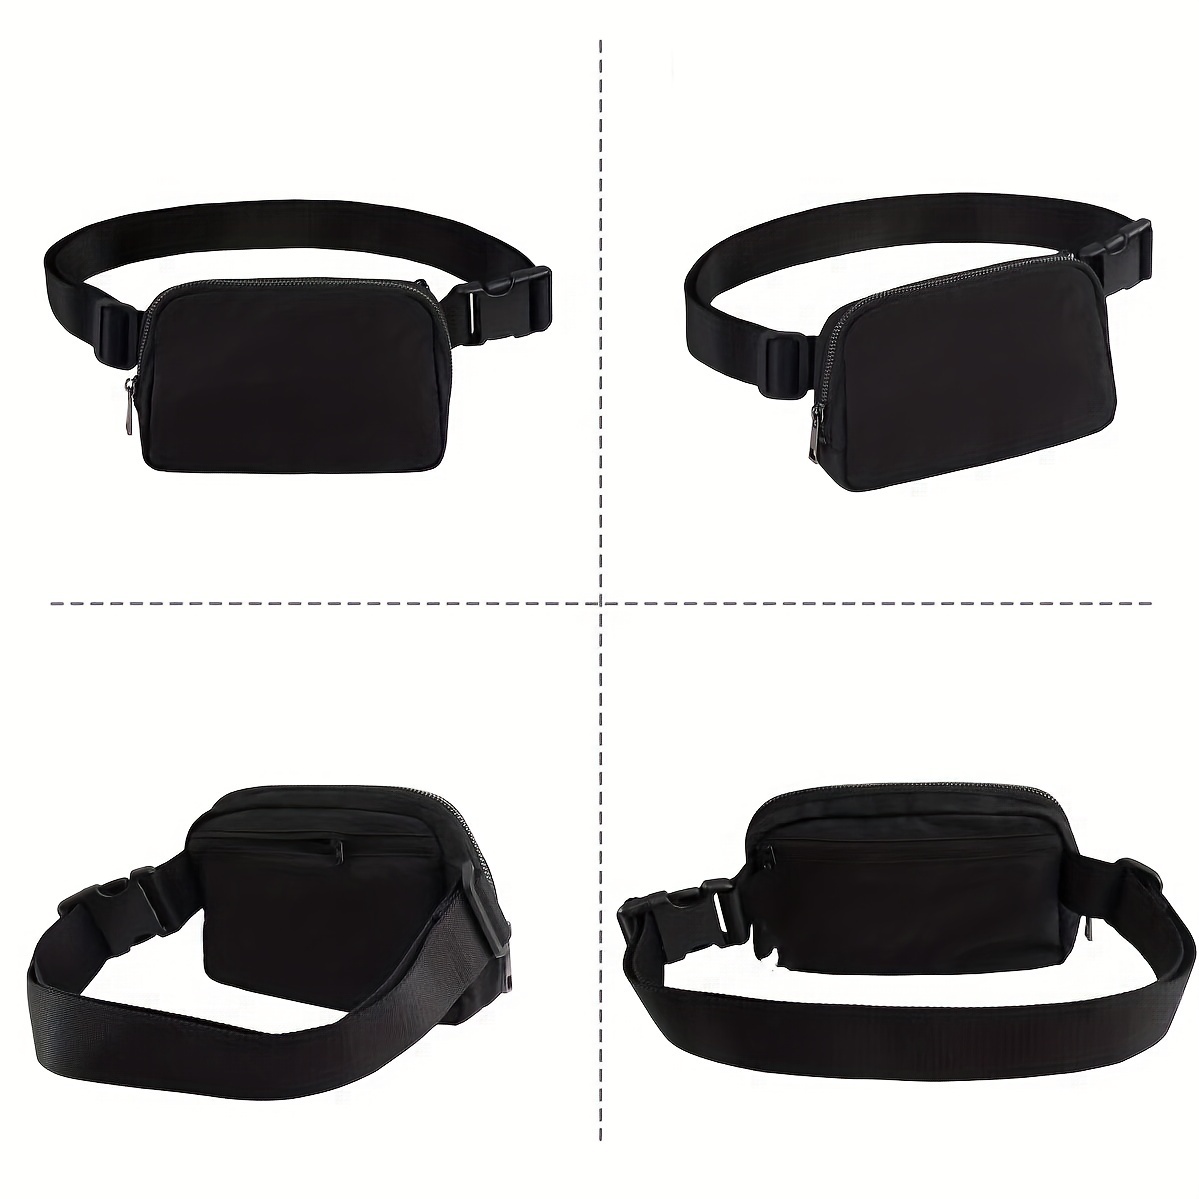 Buy Fanny Pack for Women Men Fashion Small Waist Bag Belt Bag with  Adjustable Strap for Travel Hiking Running, Black, One Size at